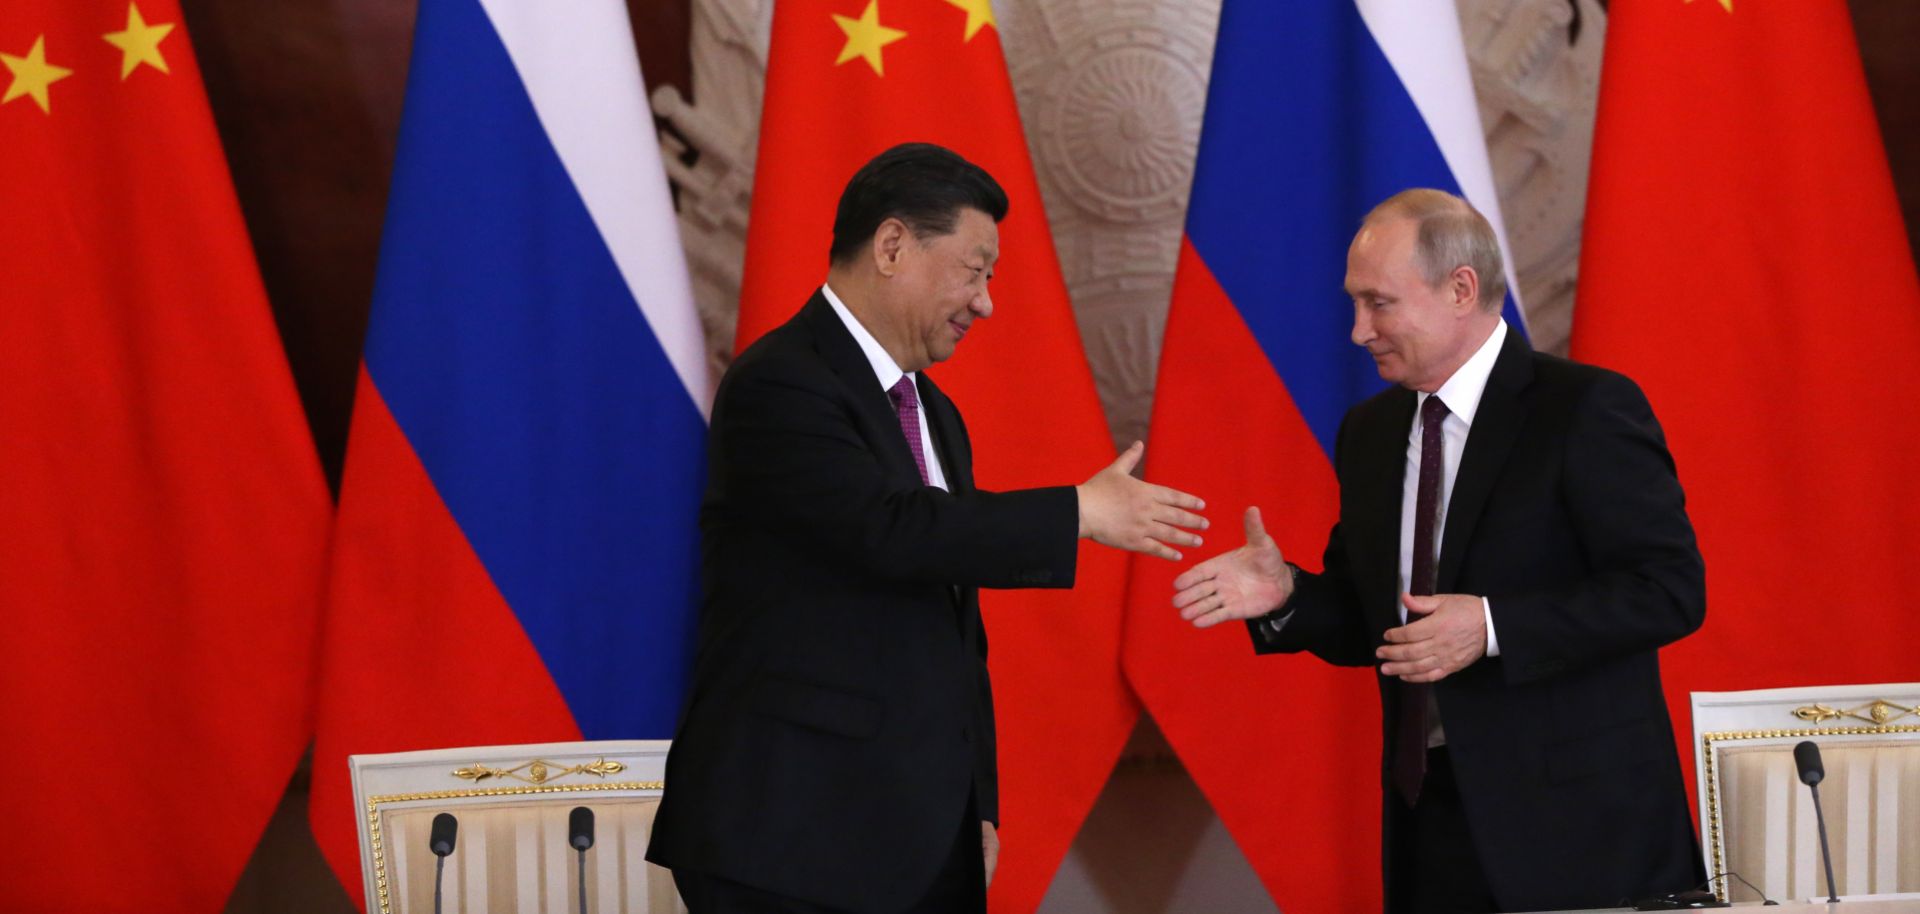 Chinese President Xi Jinping and Russian President Vladimir Putin meet in the Kremlin in Moscow on June 5, 2019.